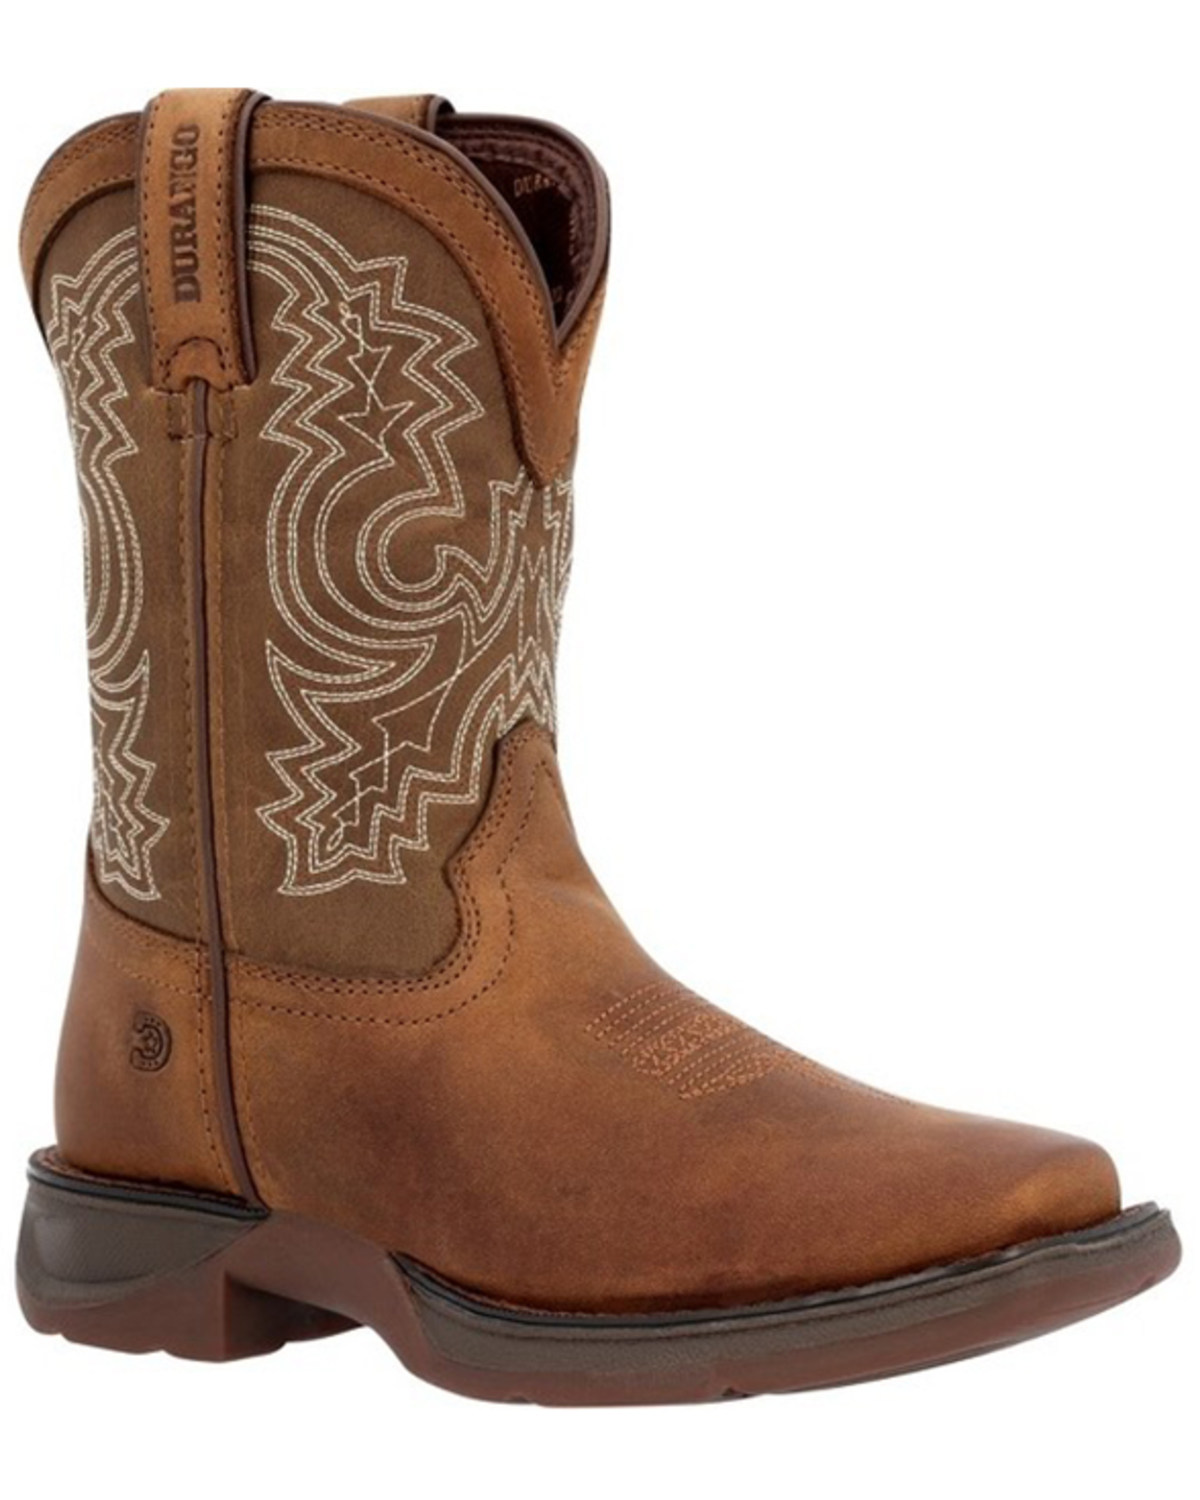 Durango Boys' Lil Rebel Embroidered Western Boots - Broad Square Toe